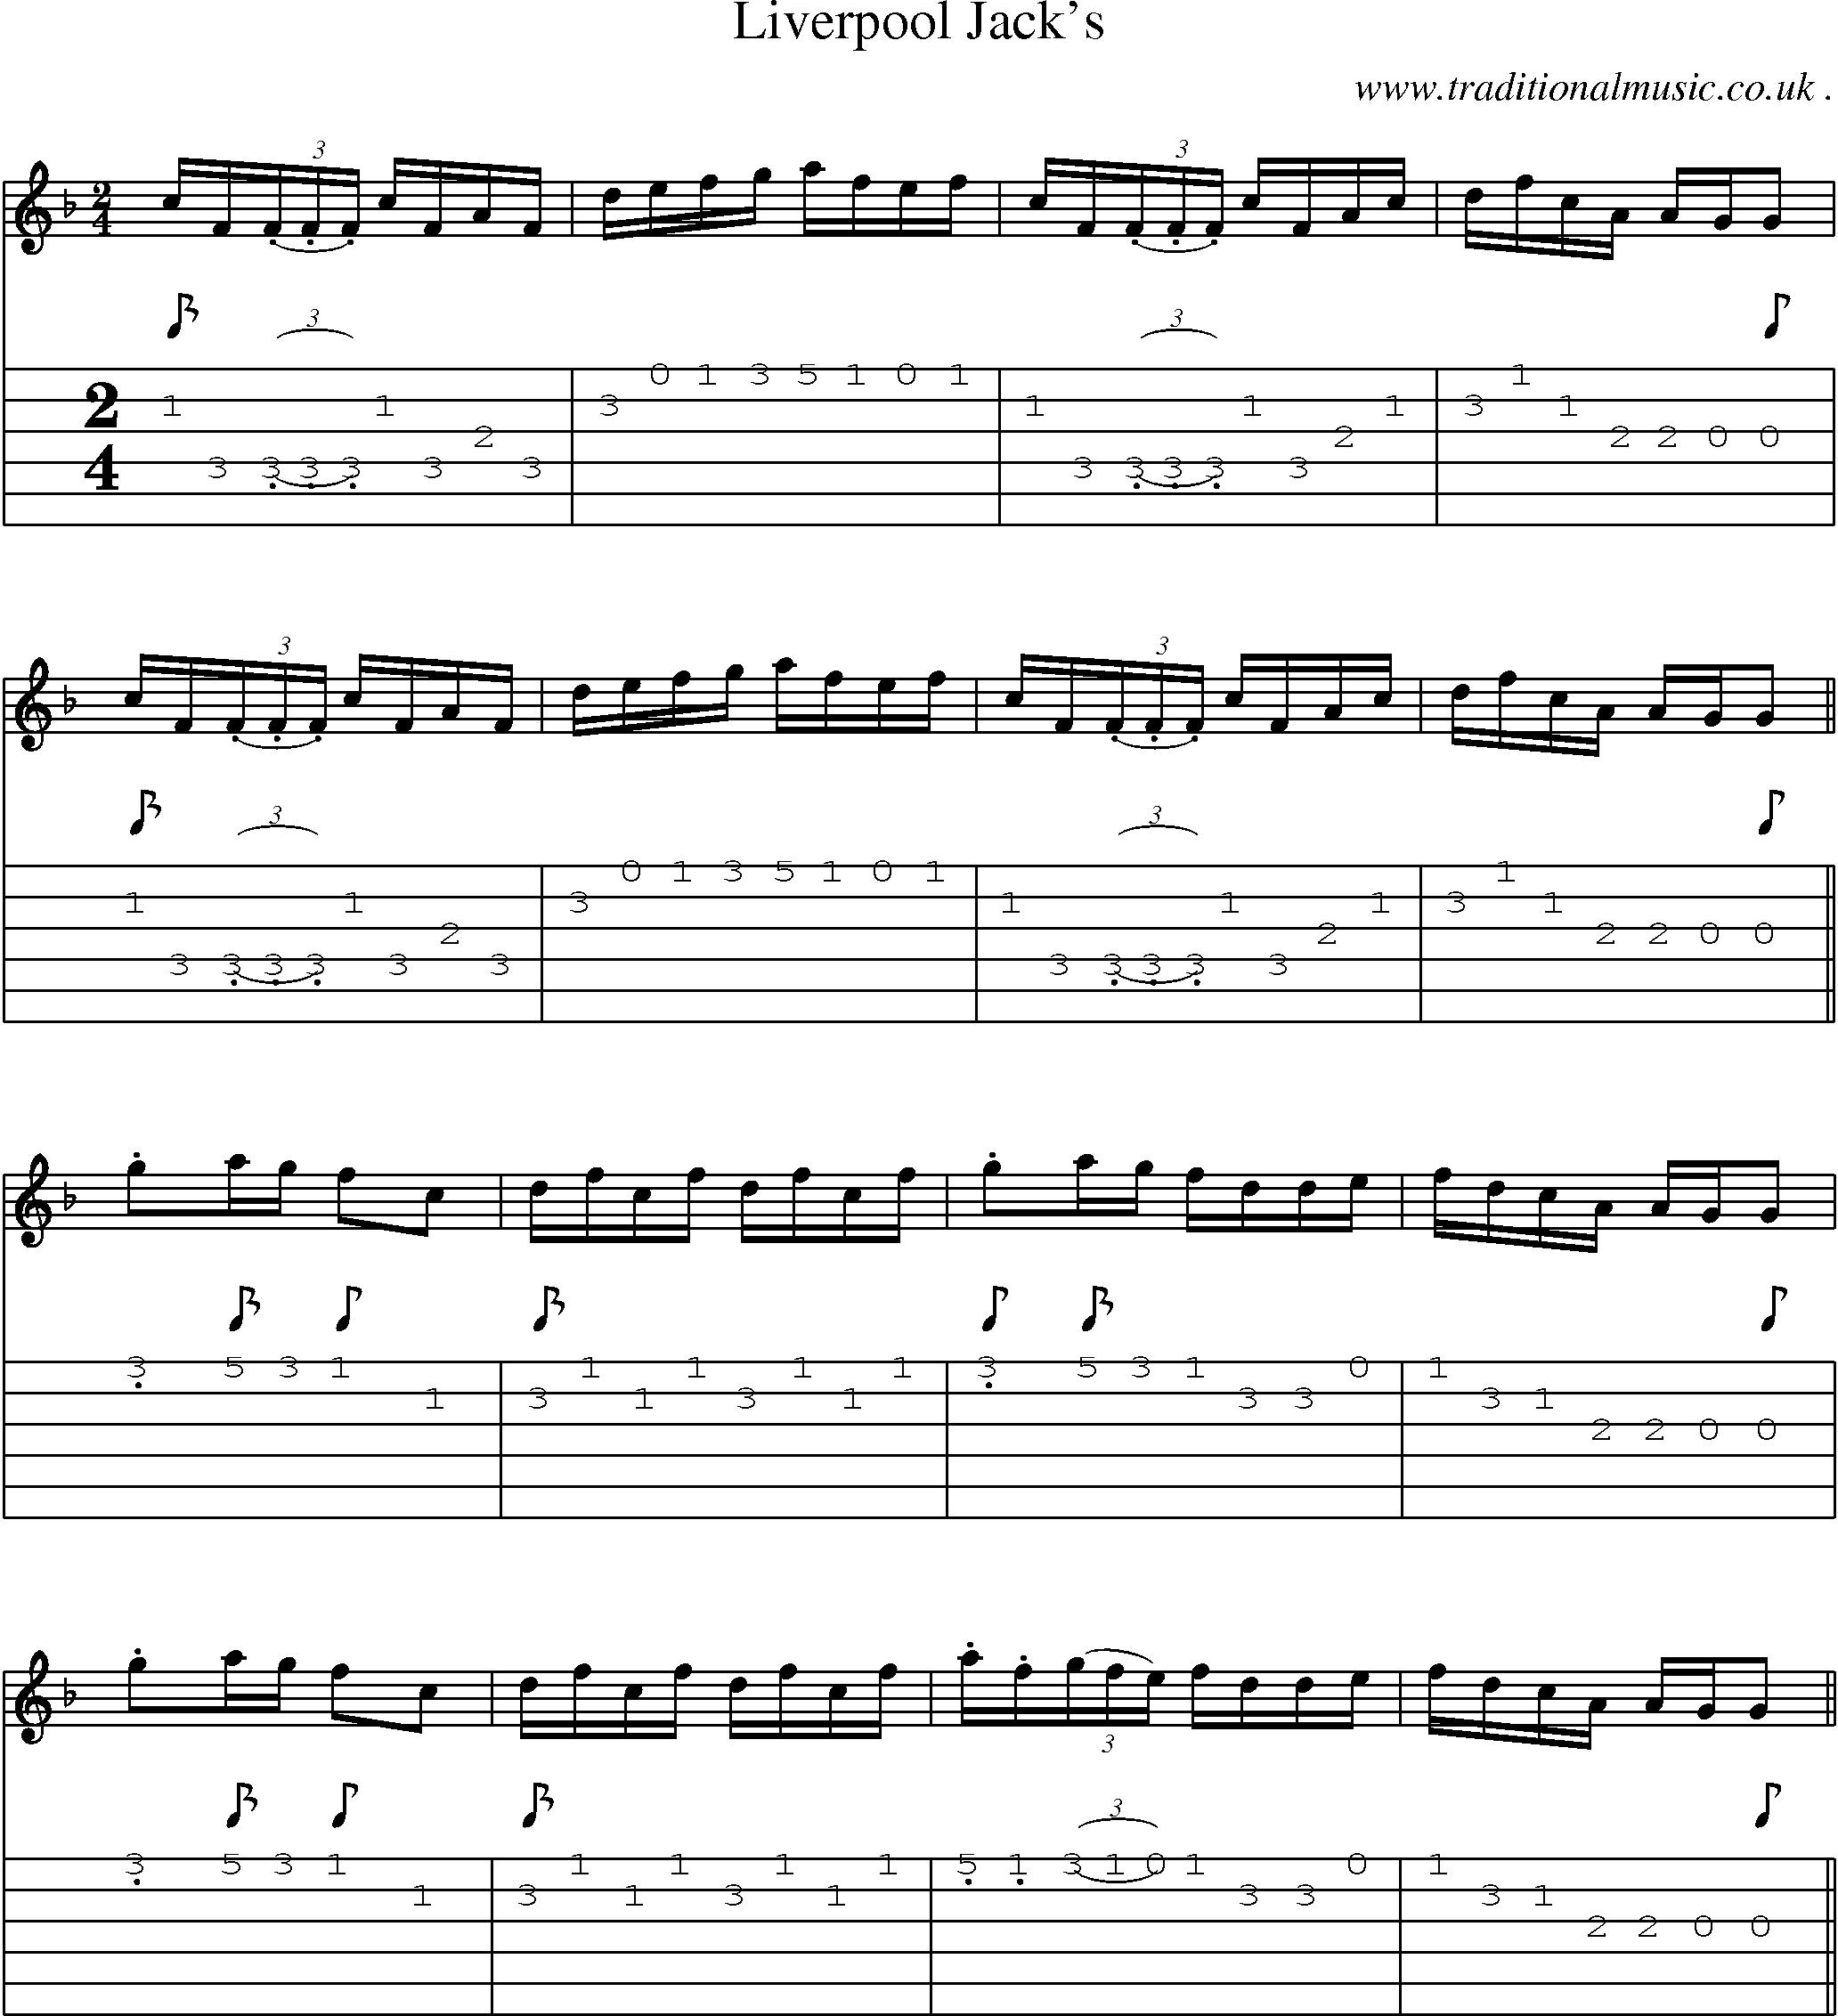 Sheet-Music and Guitar Tabs for Liverpool Jacks